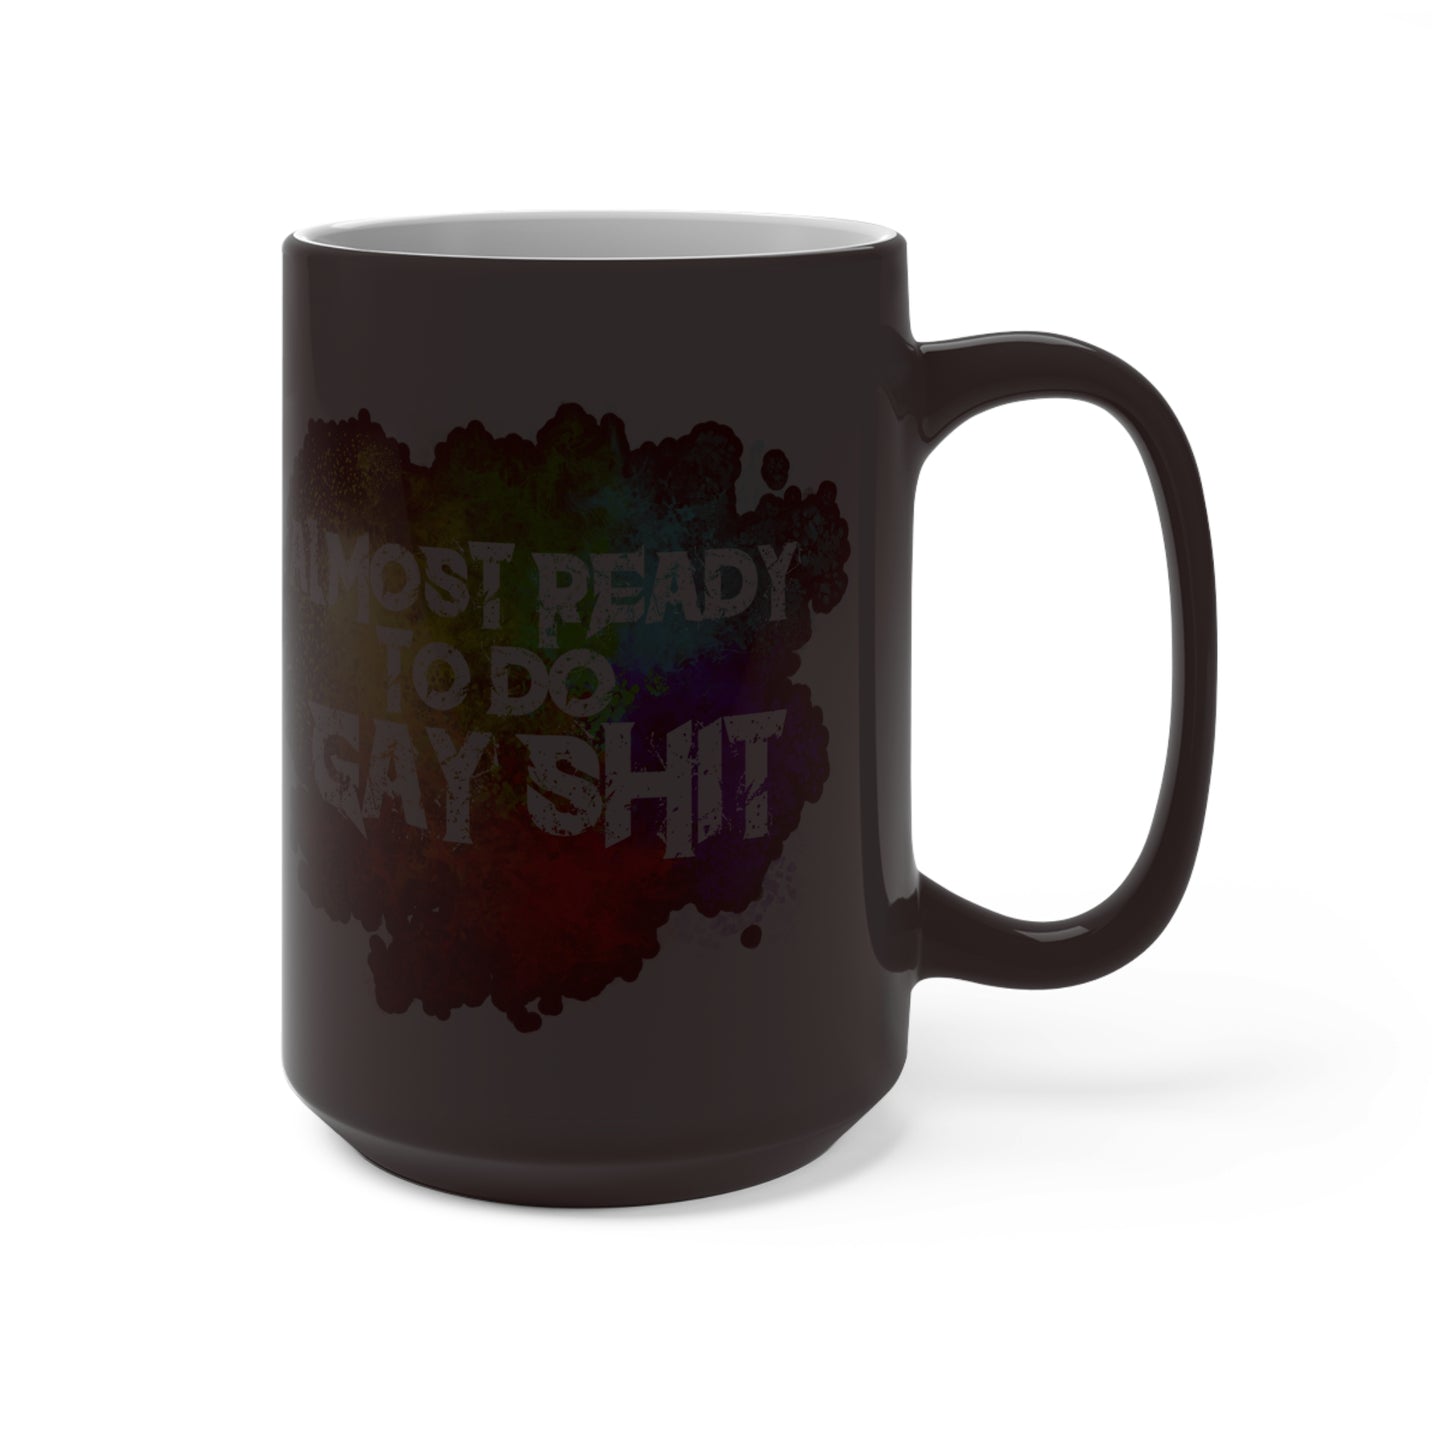 Experience the magic of the 'Almost Ready To Do Gay Shit' 11oz color-changing mug by Moody Booty Apparel. This LGBTQ pride coffee mug surprises as it transitions colors with temperature. Celebrate love, equality, and individuality.